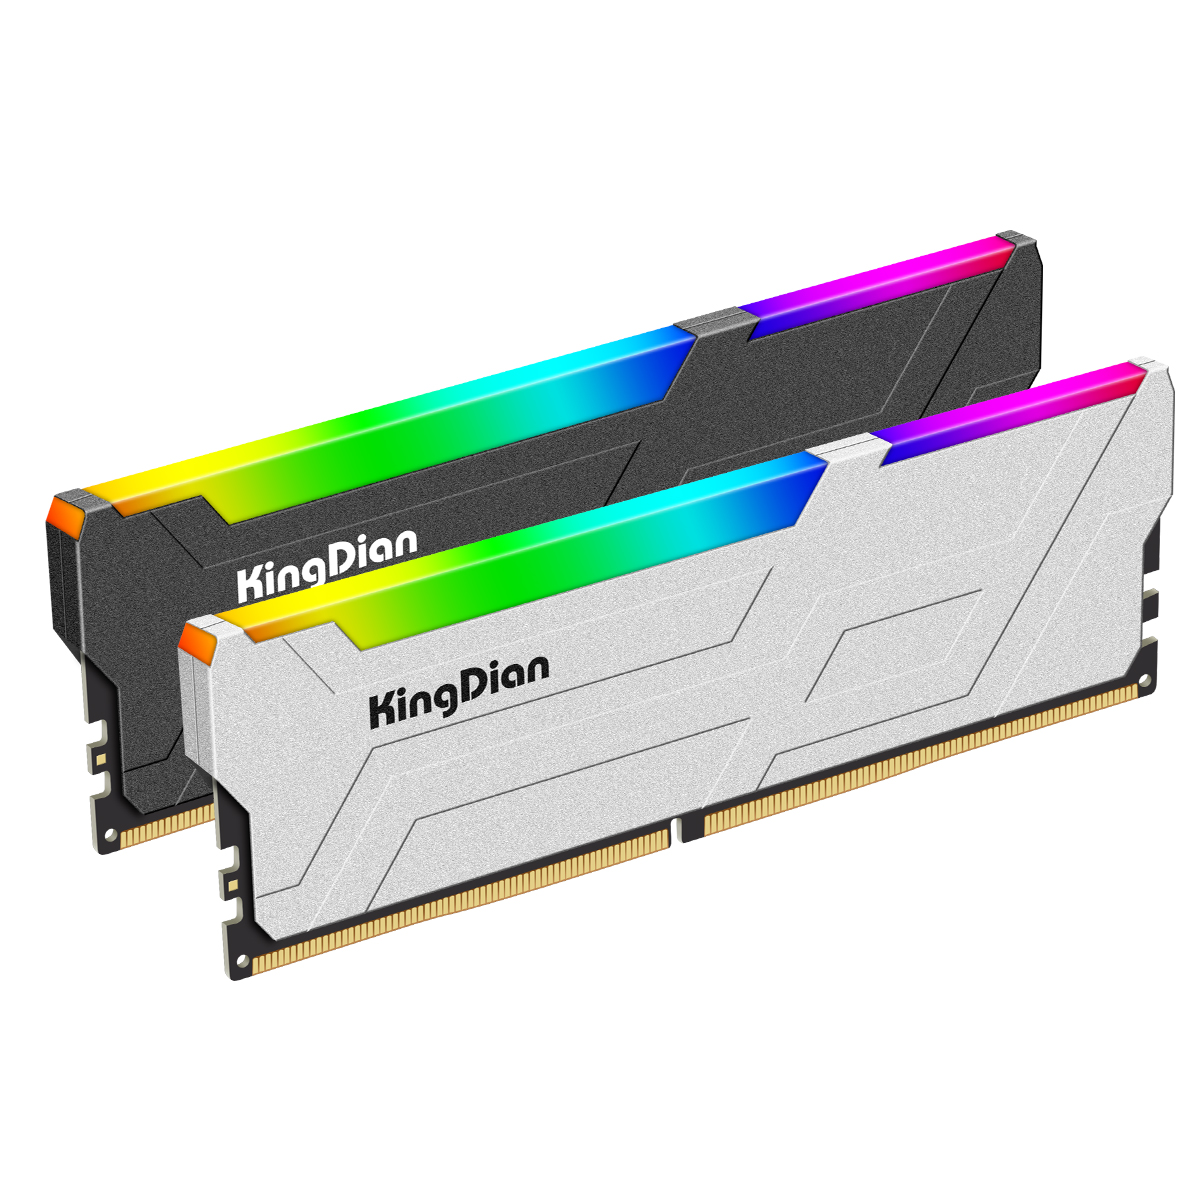 KingDian DDR5 UDIMM RGB Series RH52 - Better Upgrade Memory for Gaming and High-Performance PCs